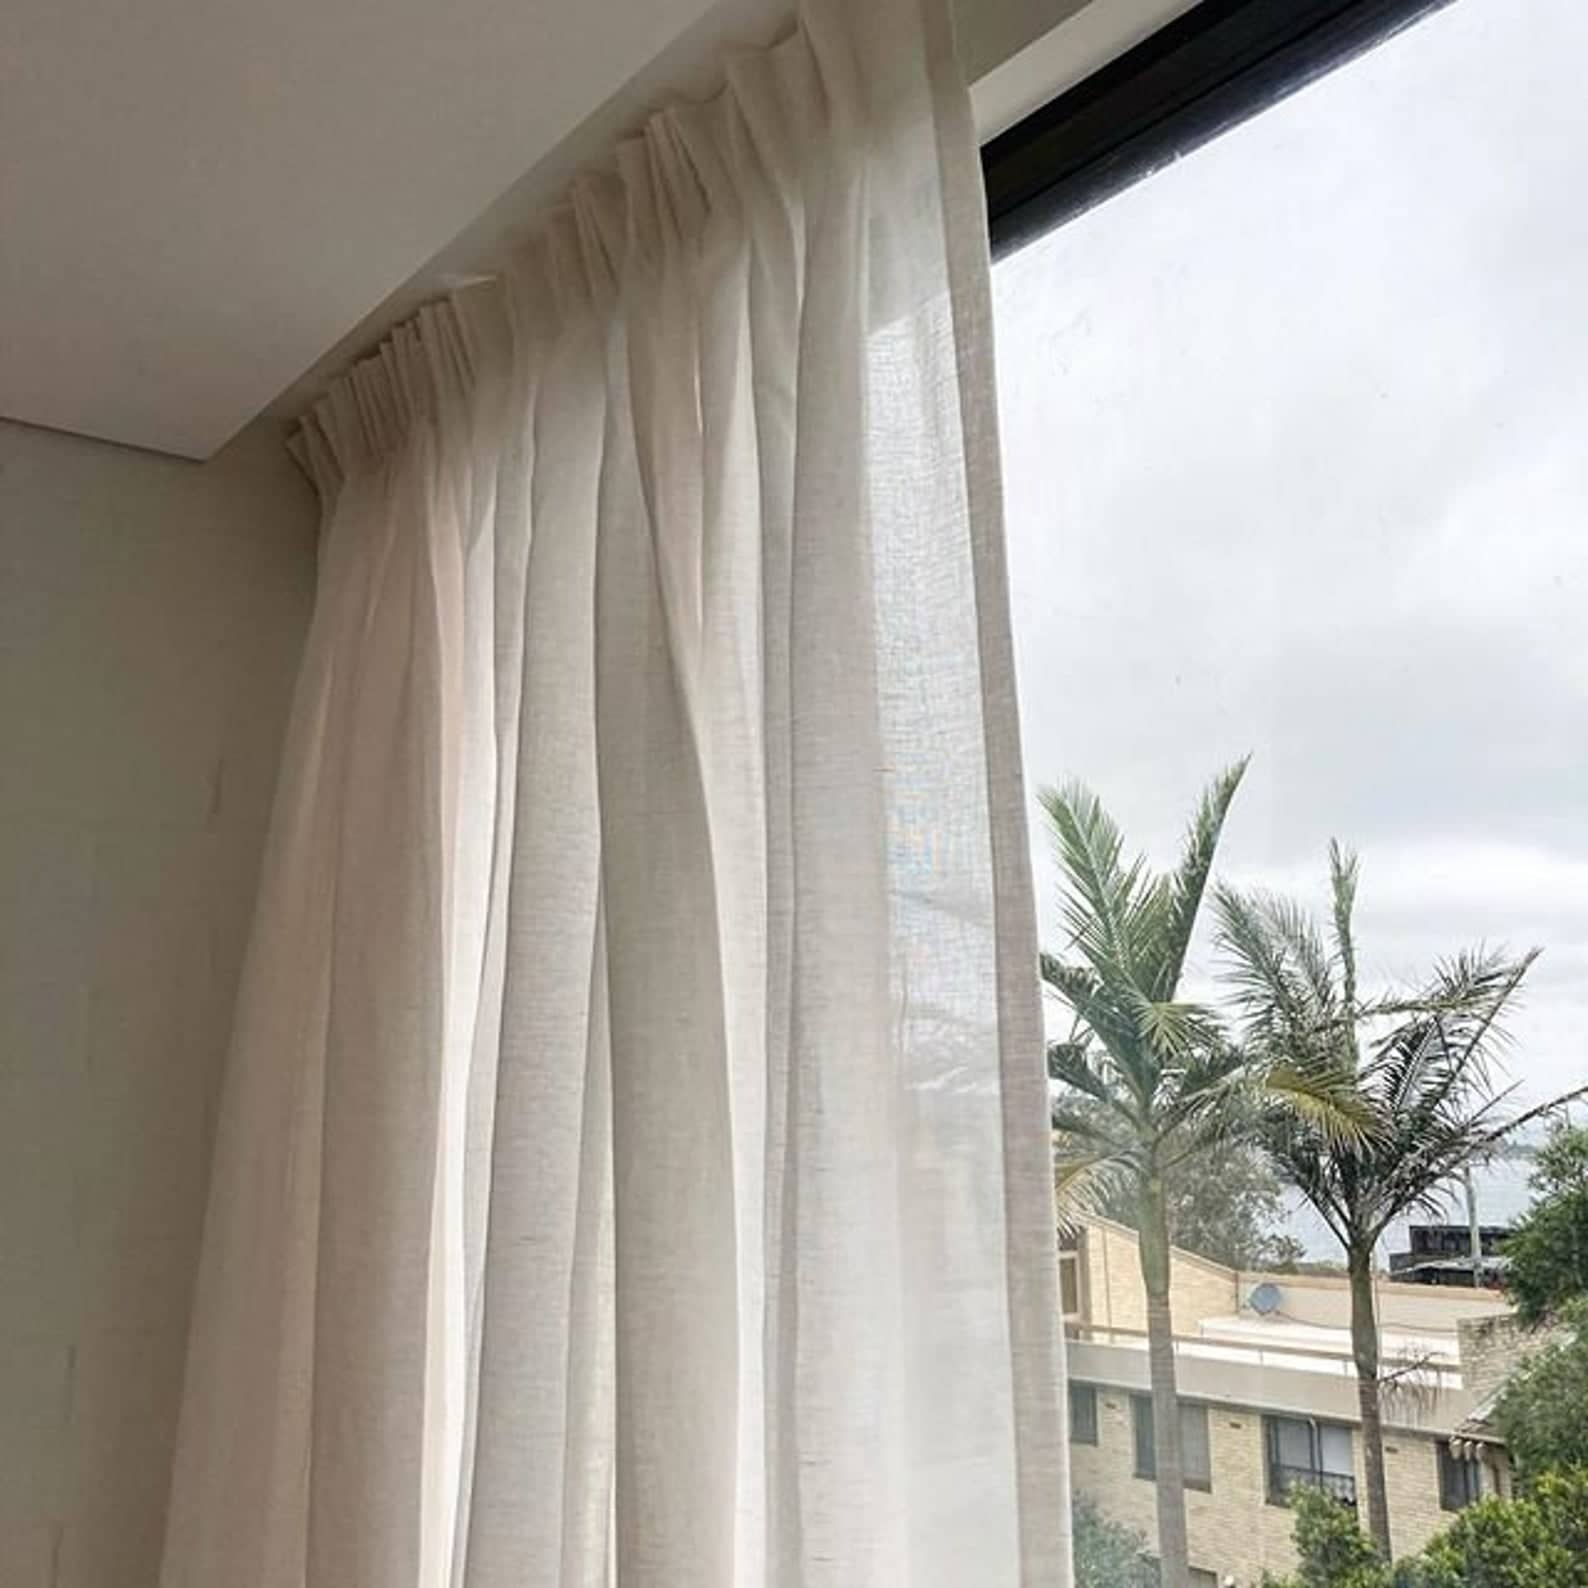 MRTREES Voile Curtains 69 Inch Drop 2 Panels Faux Linen Eyelet Sheer Curtain Panel for Bedroom Living Room Patio Door 55x69 Inch Drop 140cm x 175cm White 